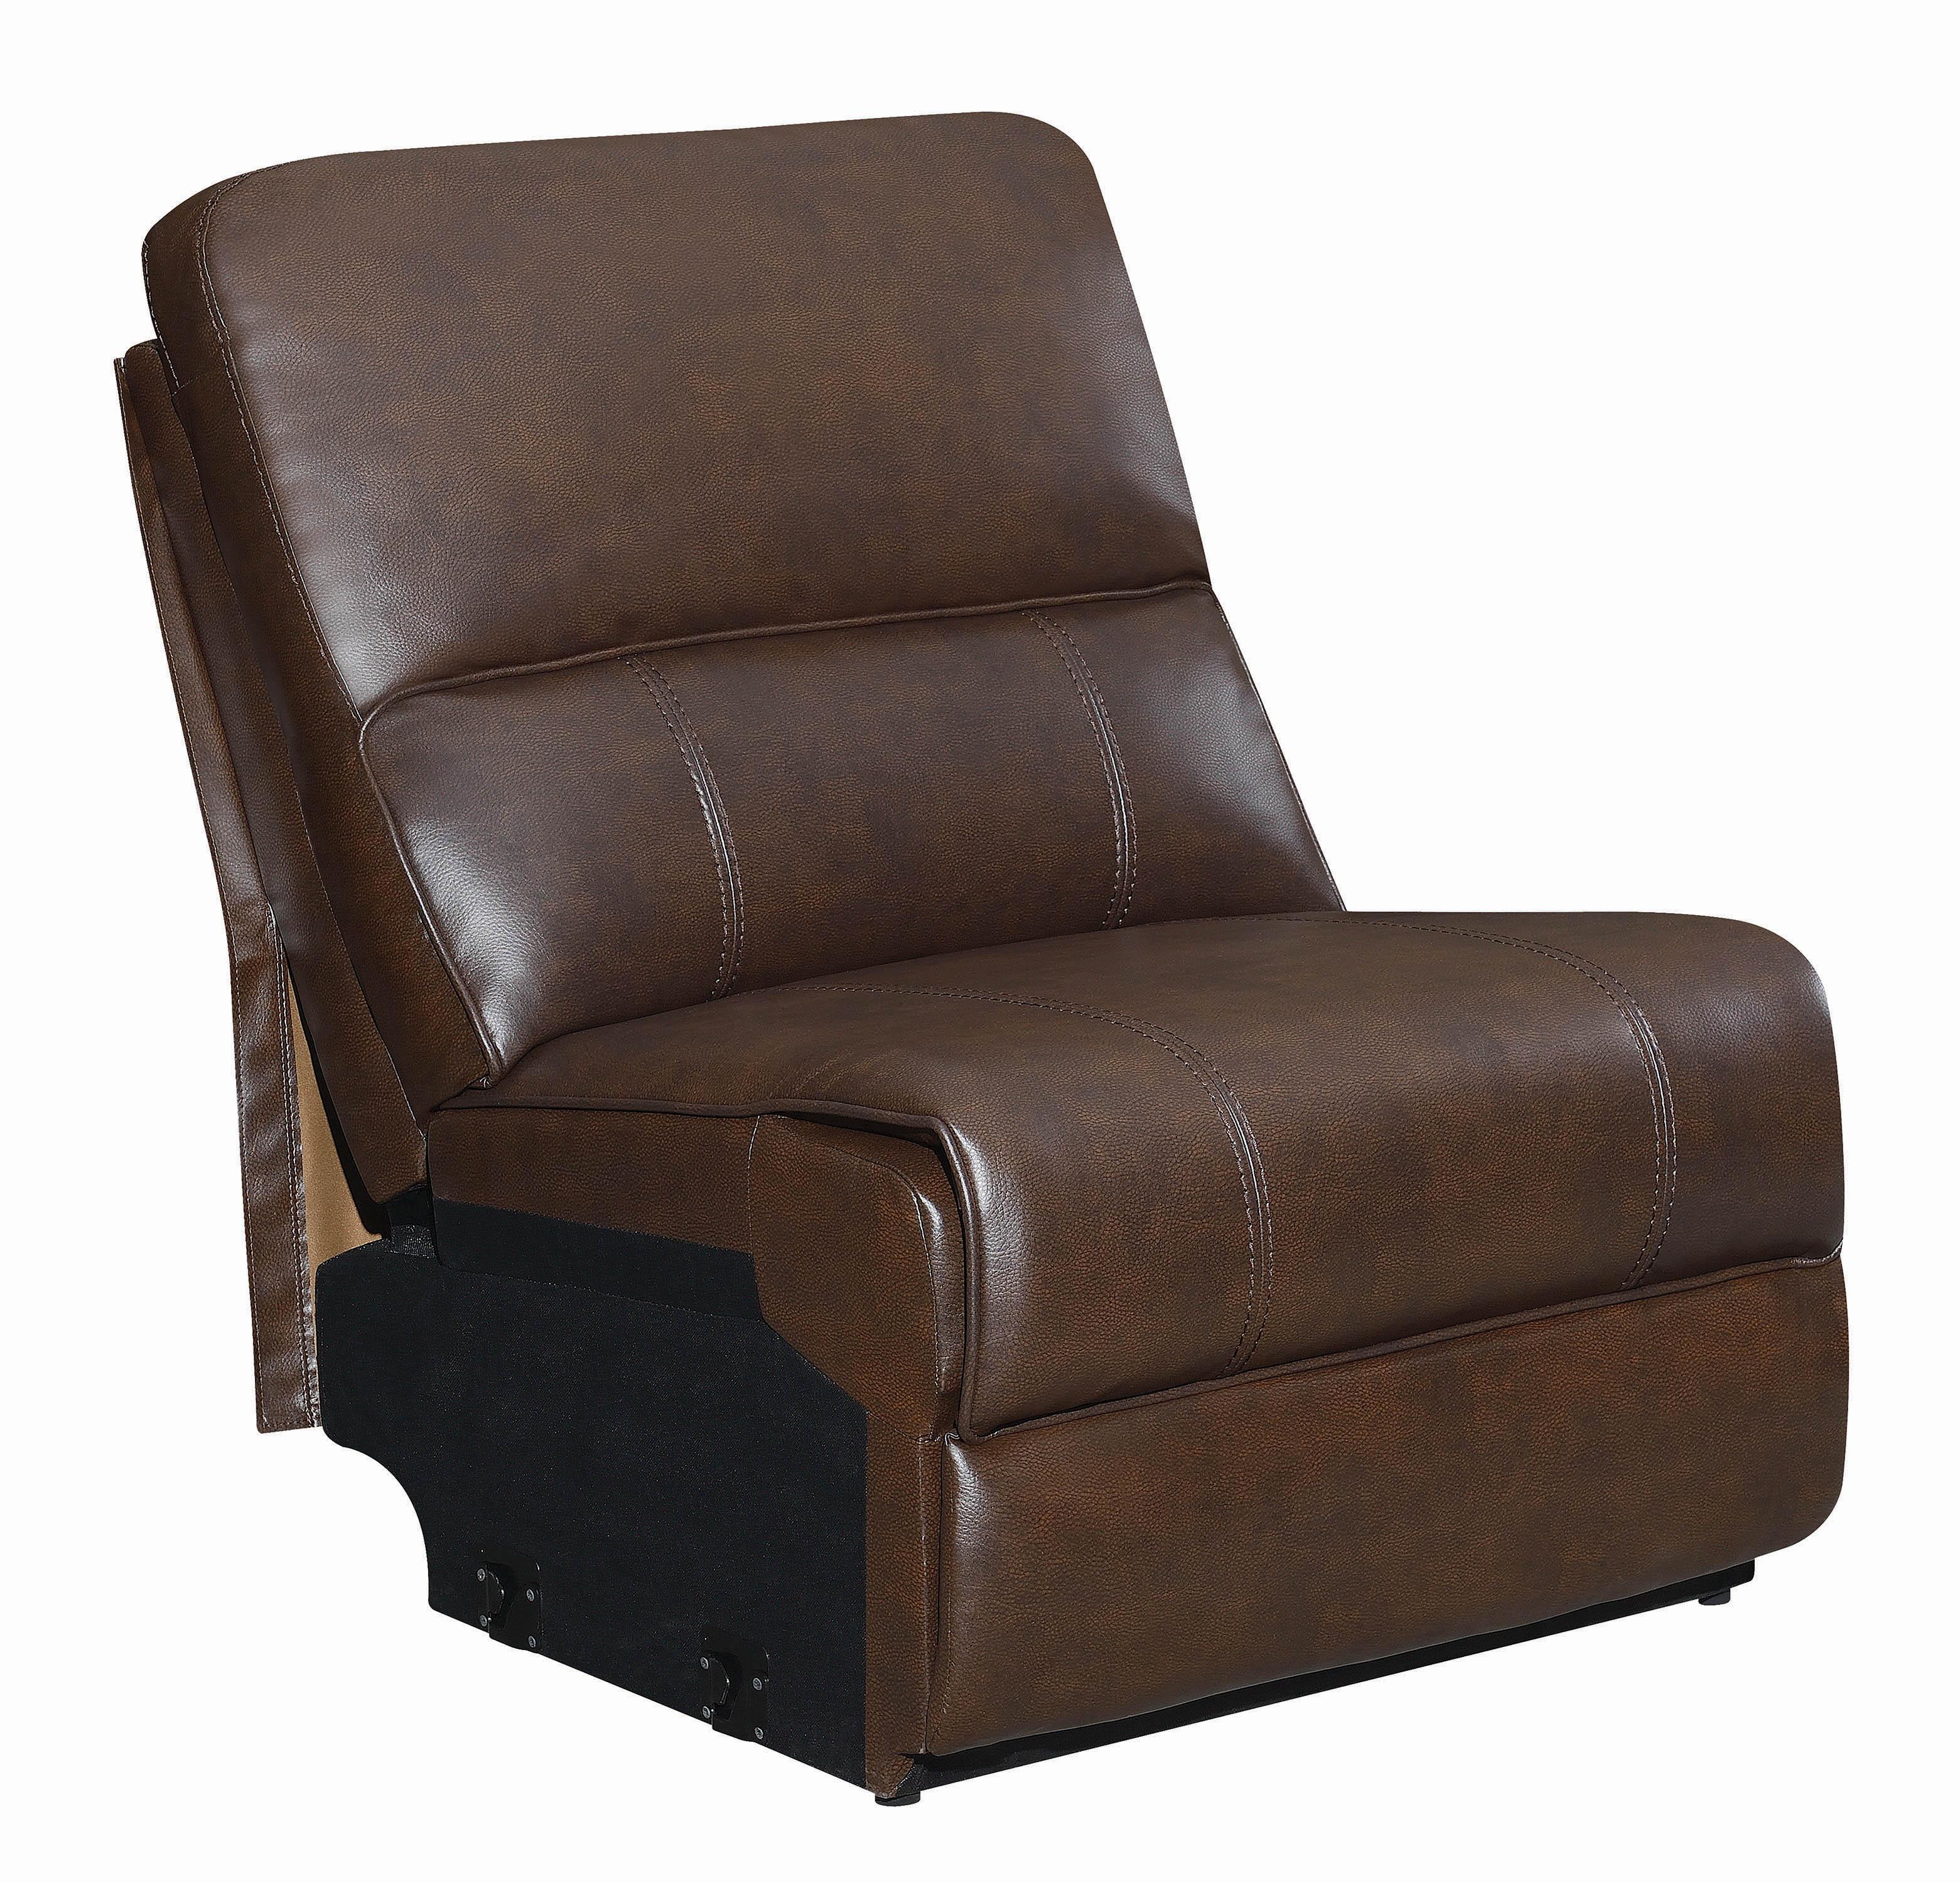 

    
Contemporary Brown Faux Leather Upholstery power sectional Channing Coaster
